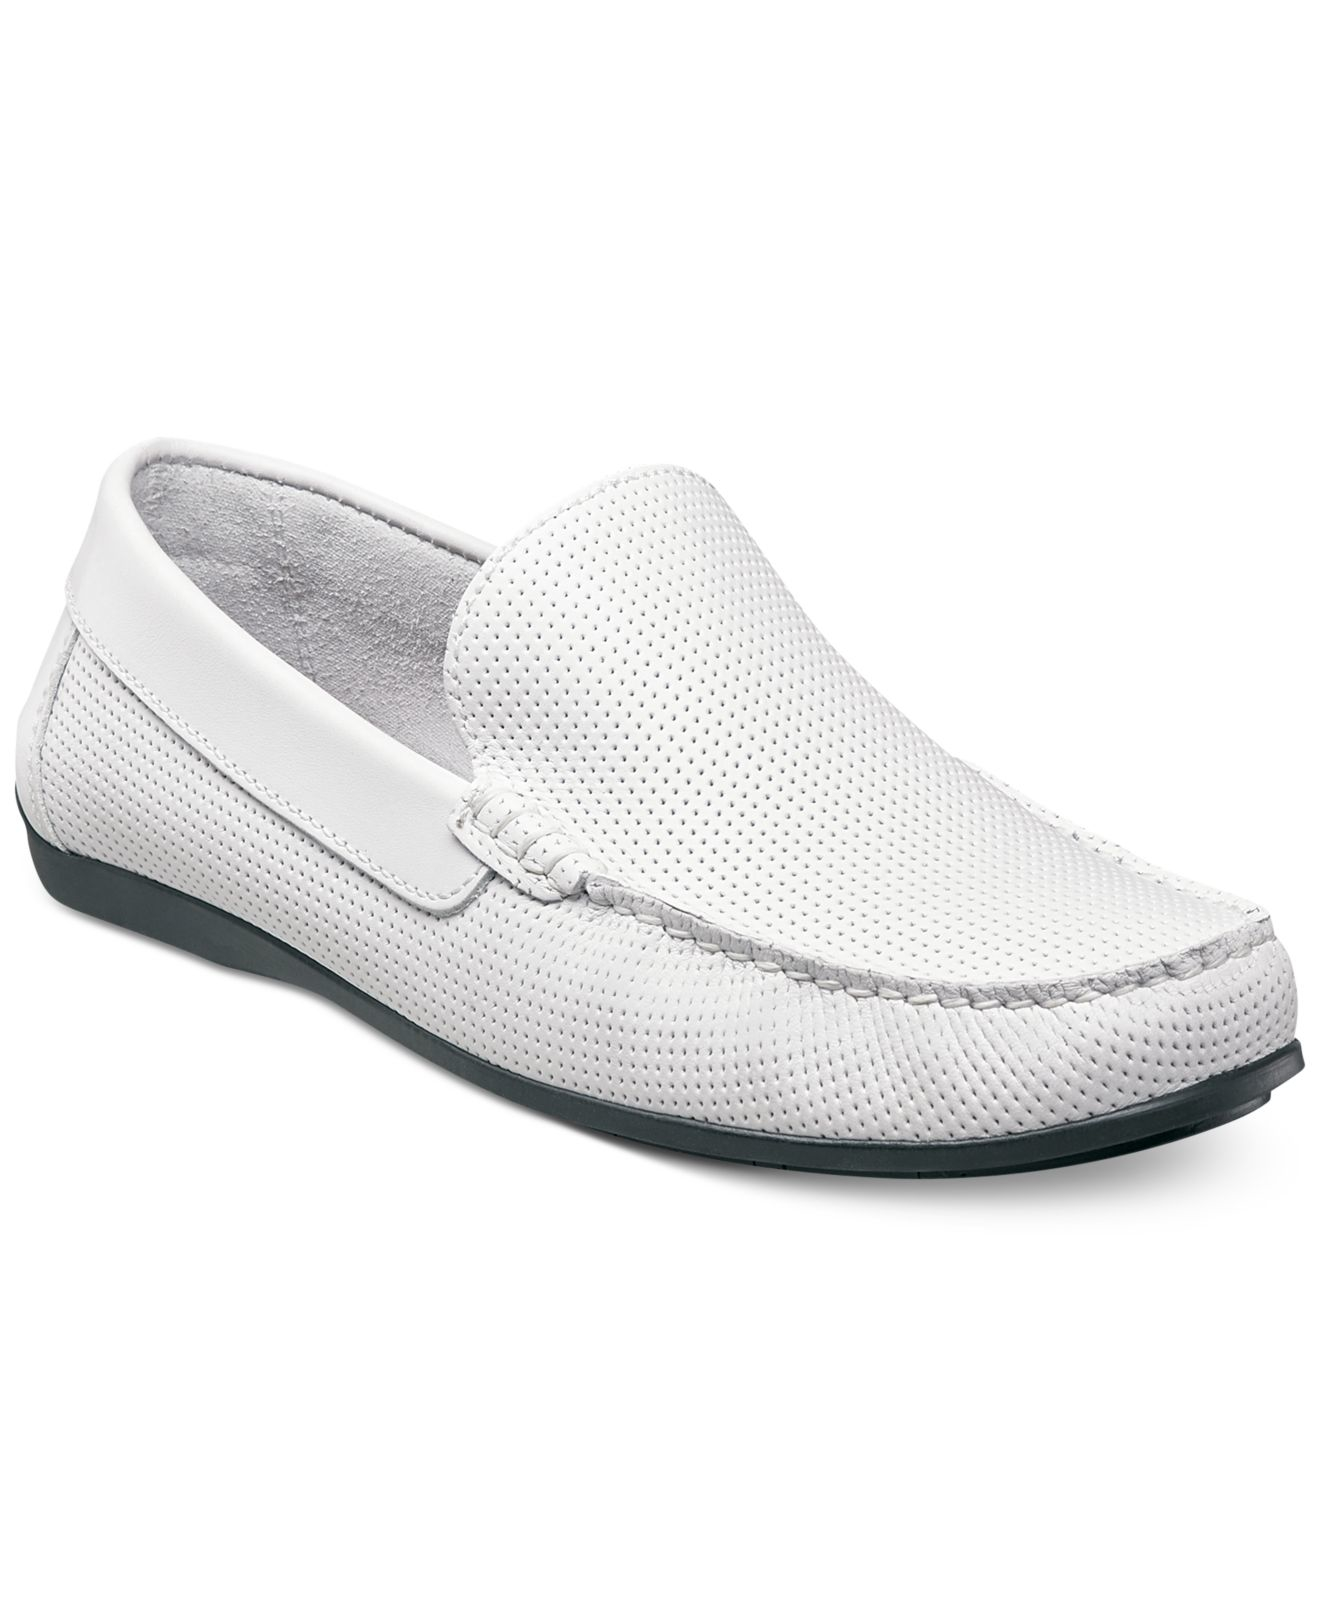 Lyst - Florsheim Men's Jasper Perforated Loafers in White for Men